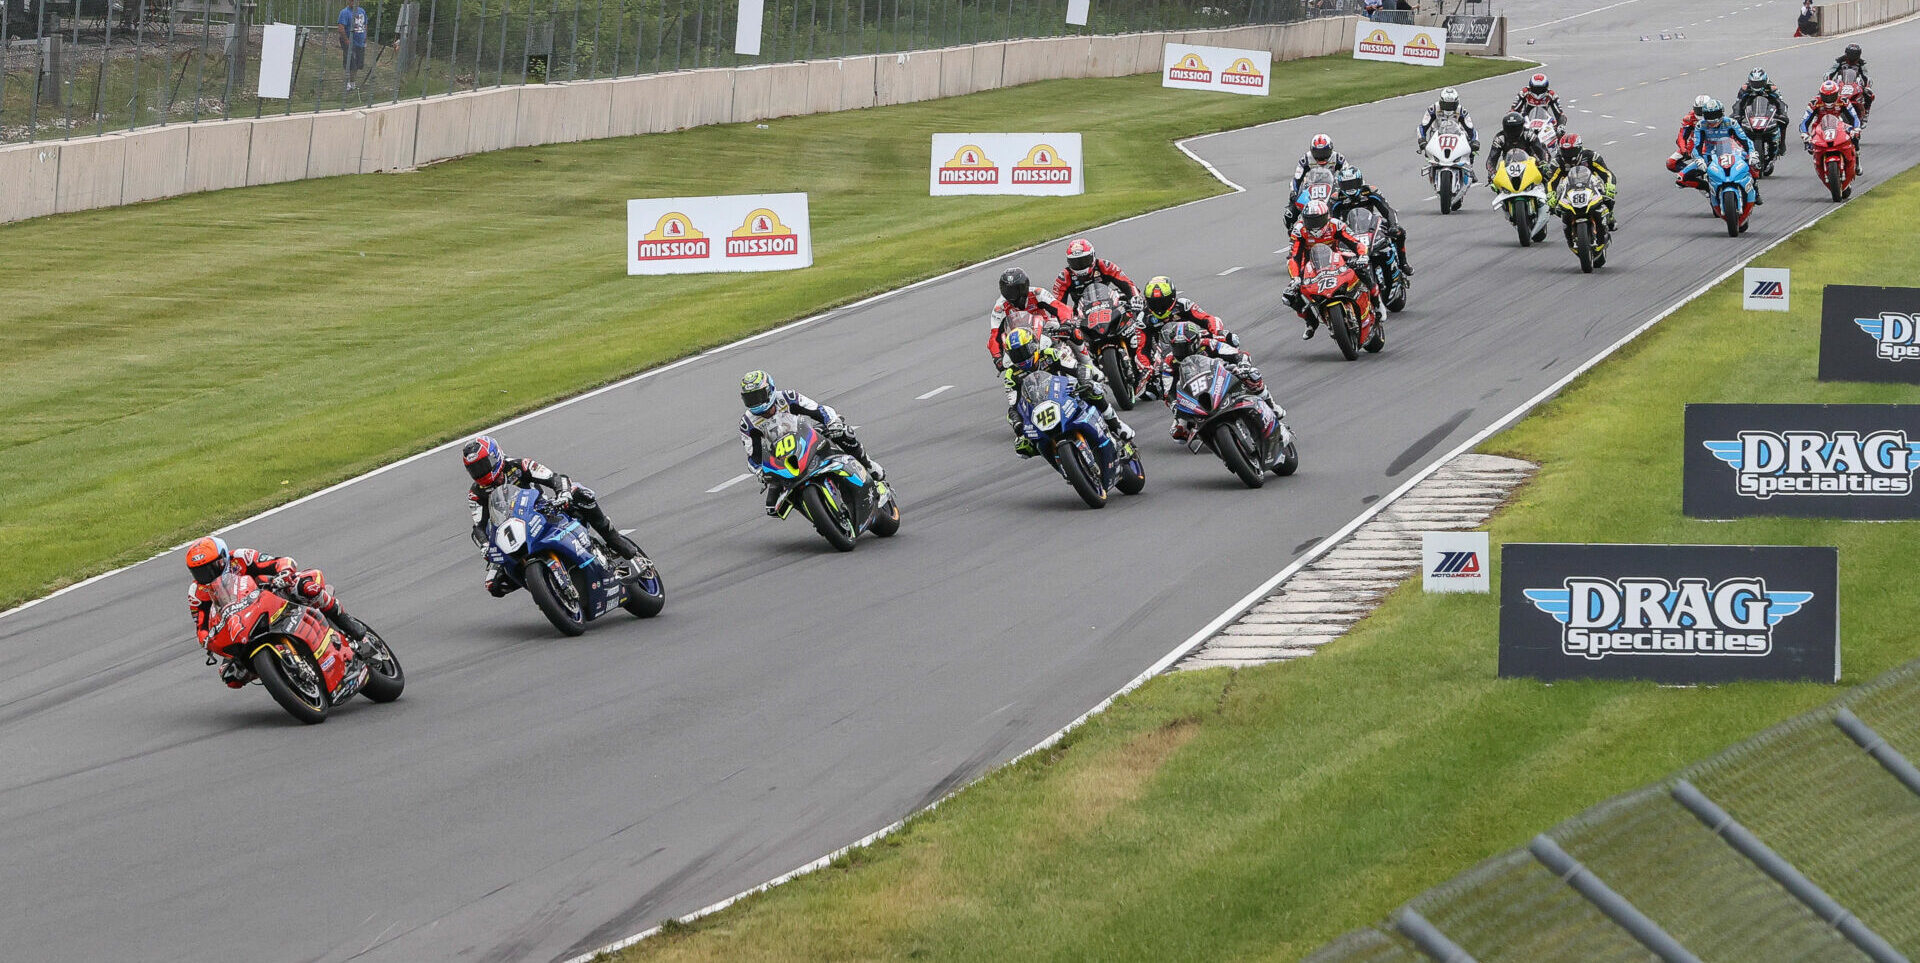 The start of MotoAmerica Superbike Race Two with Josh Herrin (2) leading Jake Gagne (1), Sean Dylan Kelly (40), Cameron Petersen (45), JD Beach (95), and the rest of the field into Turn One. Photo by Brian J. Nelson.